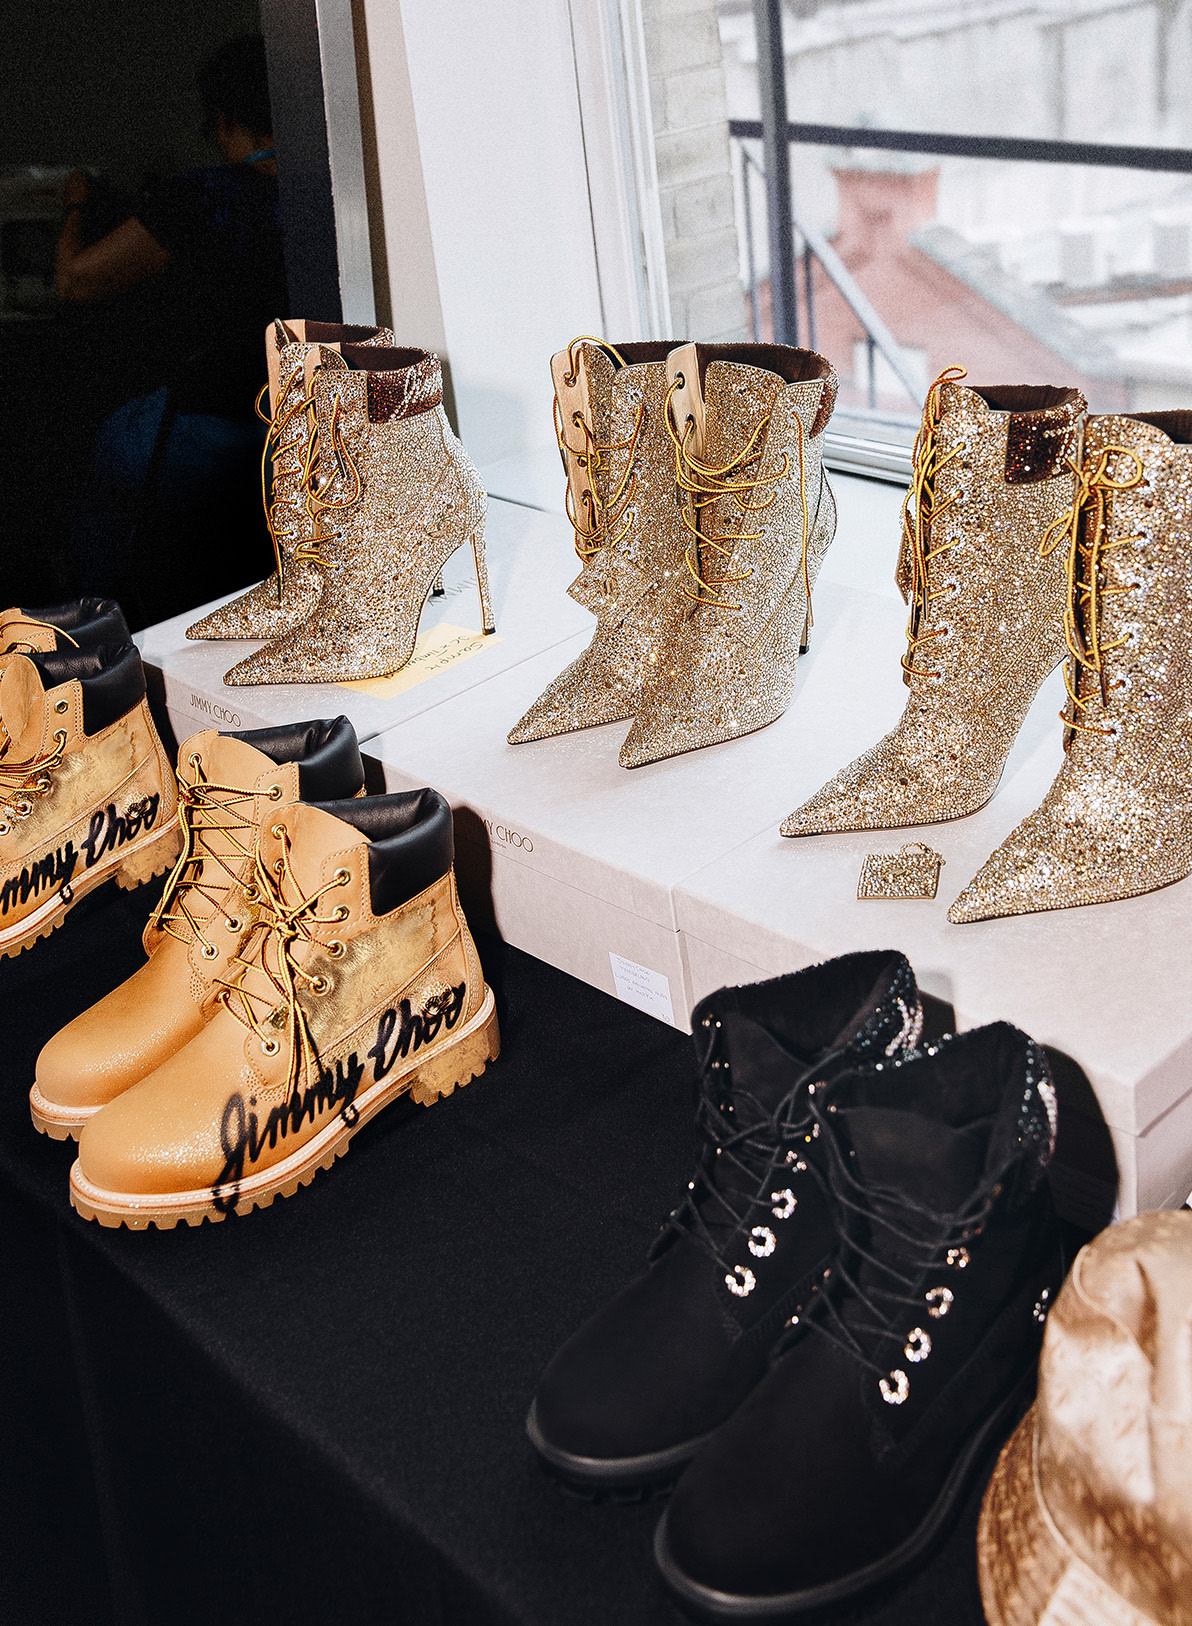 Timberland and Jimmy Choo Collaborated on Sparkly Boots